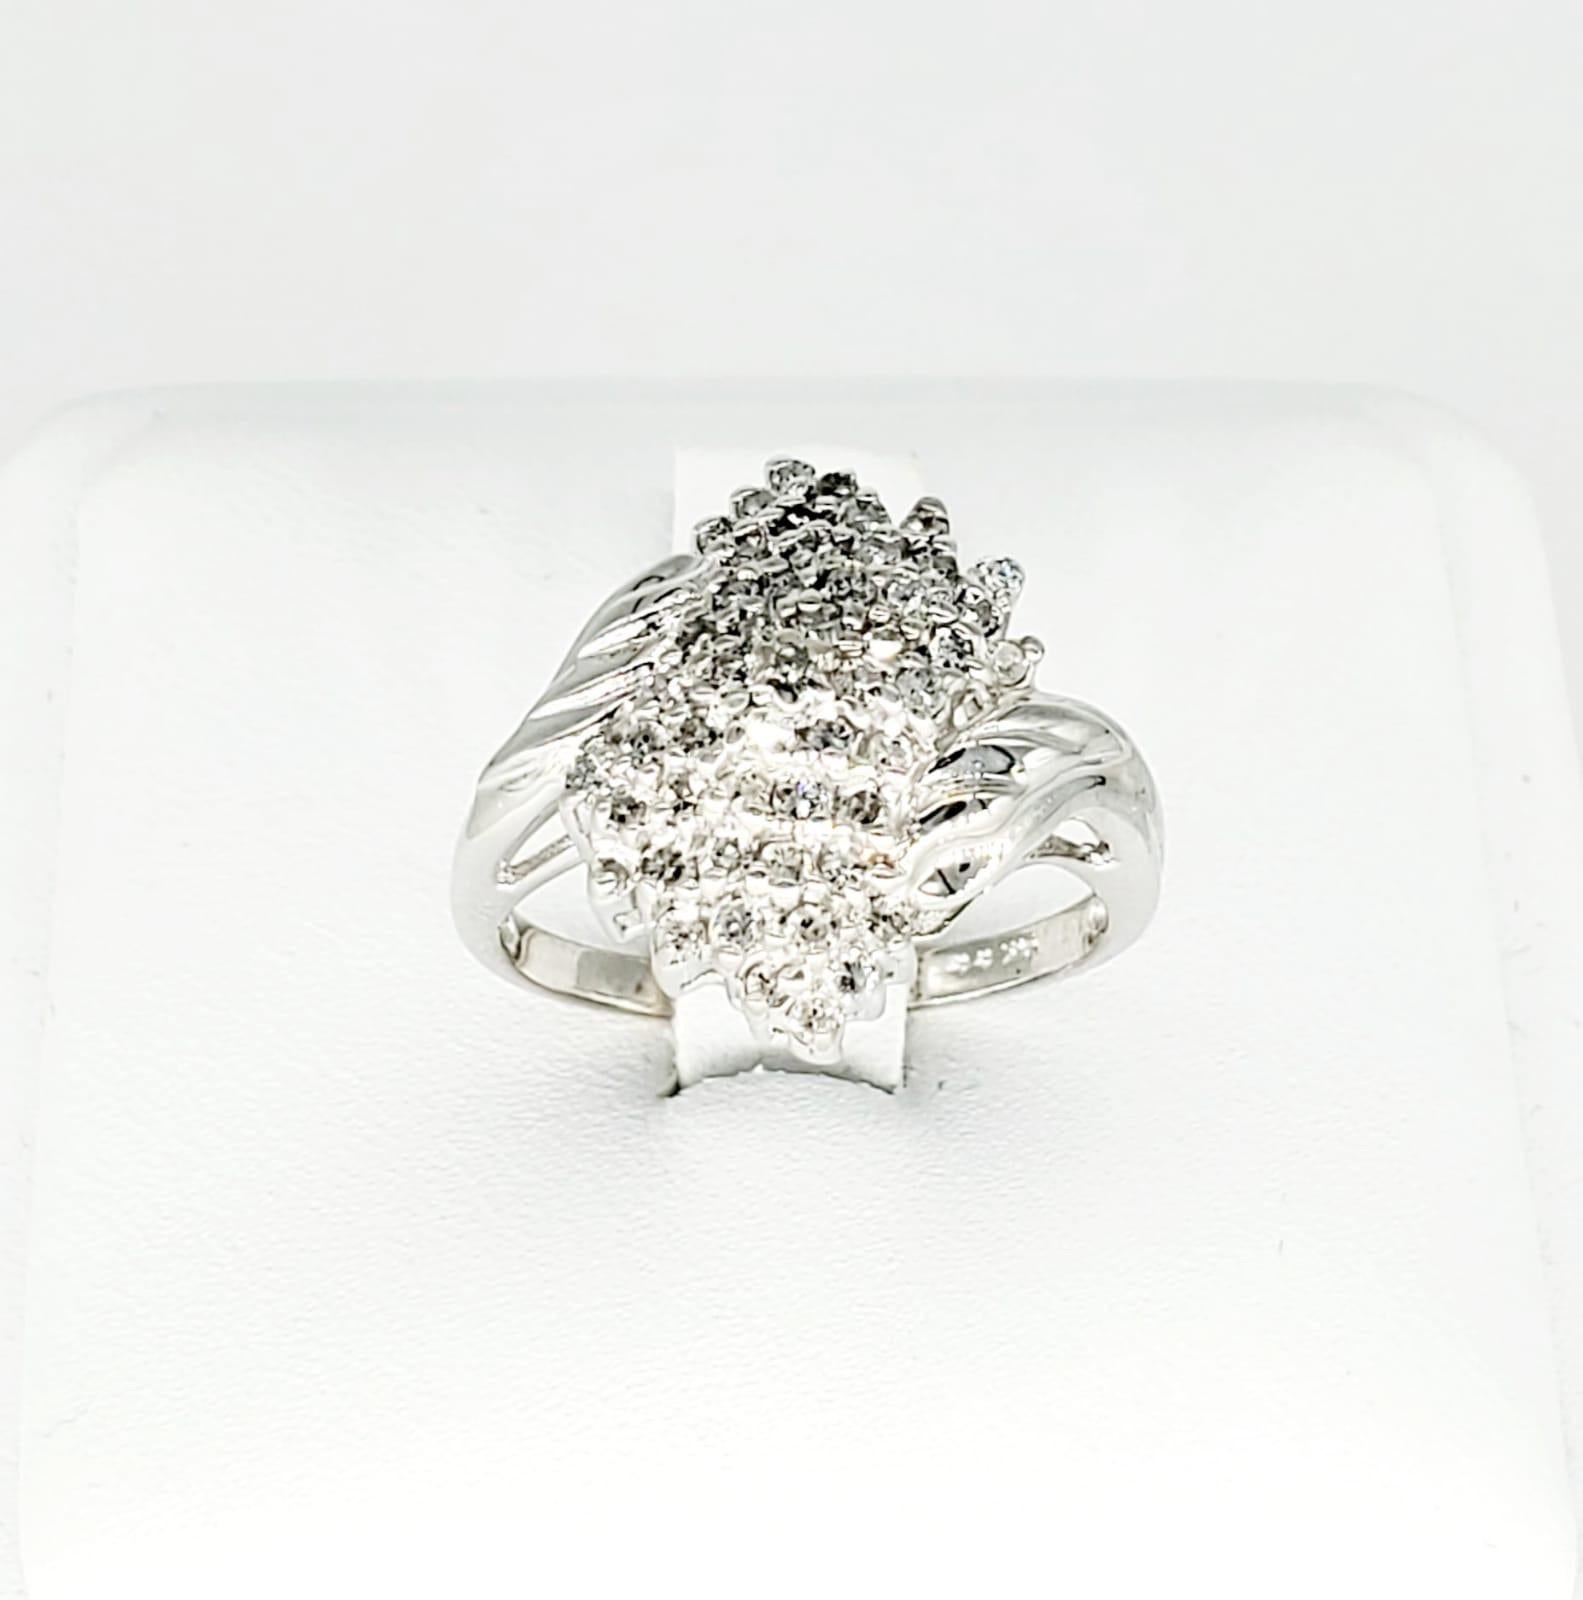 Vintage 2 Carat Diamonds Cluster Ring 14k White Gold. The ring is a size 6 and weights approx 4.8 grams.